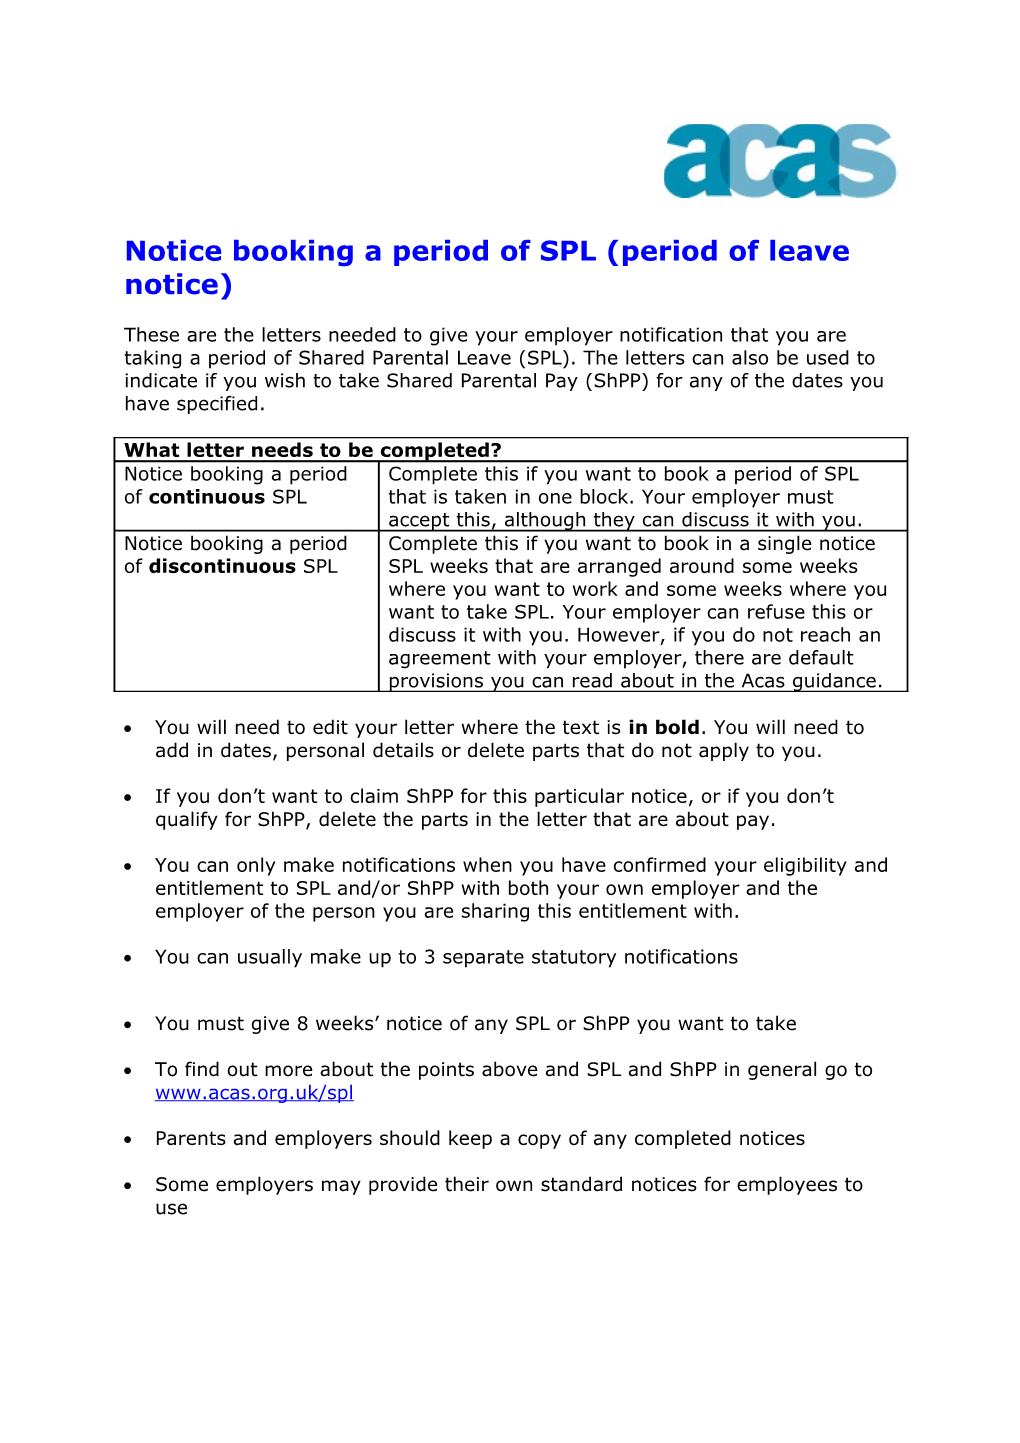 Notice Booking a Period of SPL (Period of Leave Notice)